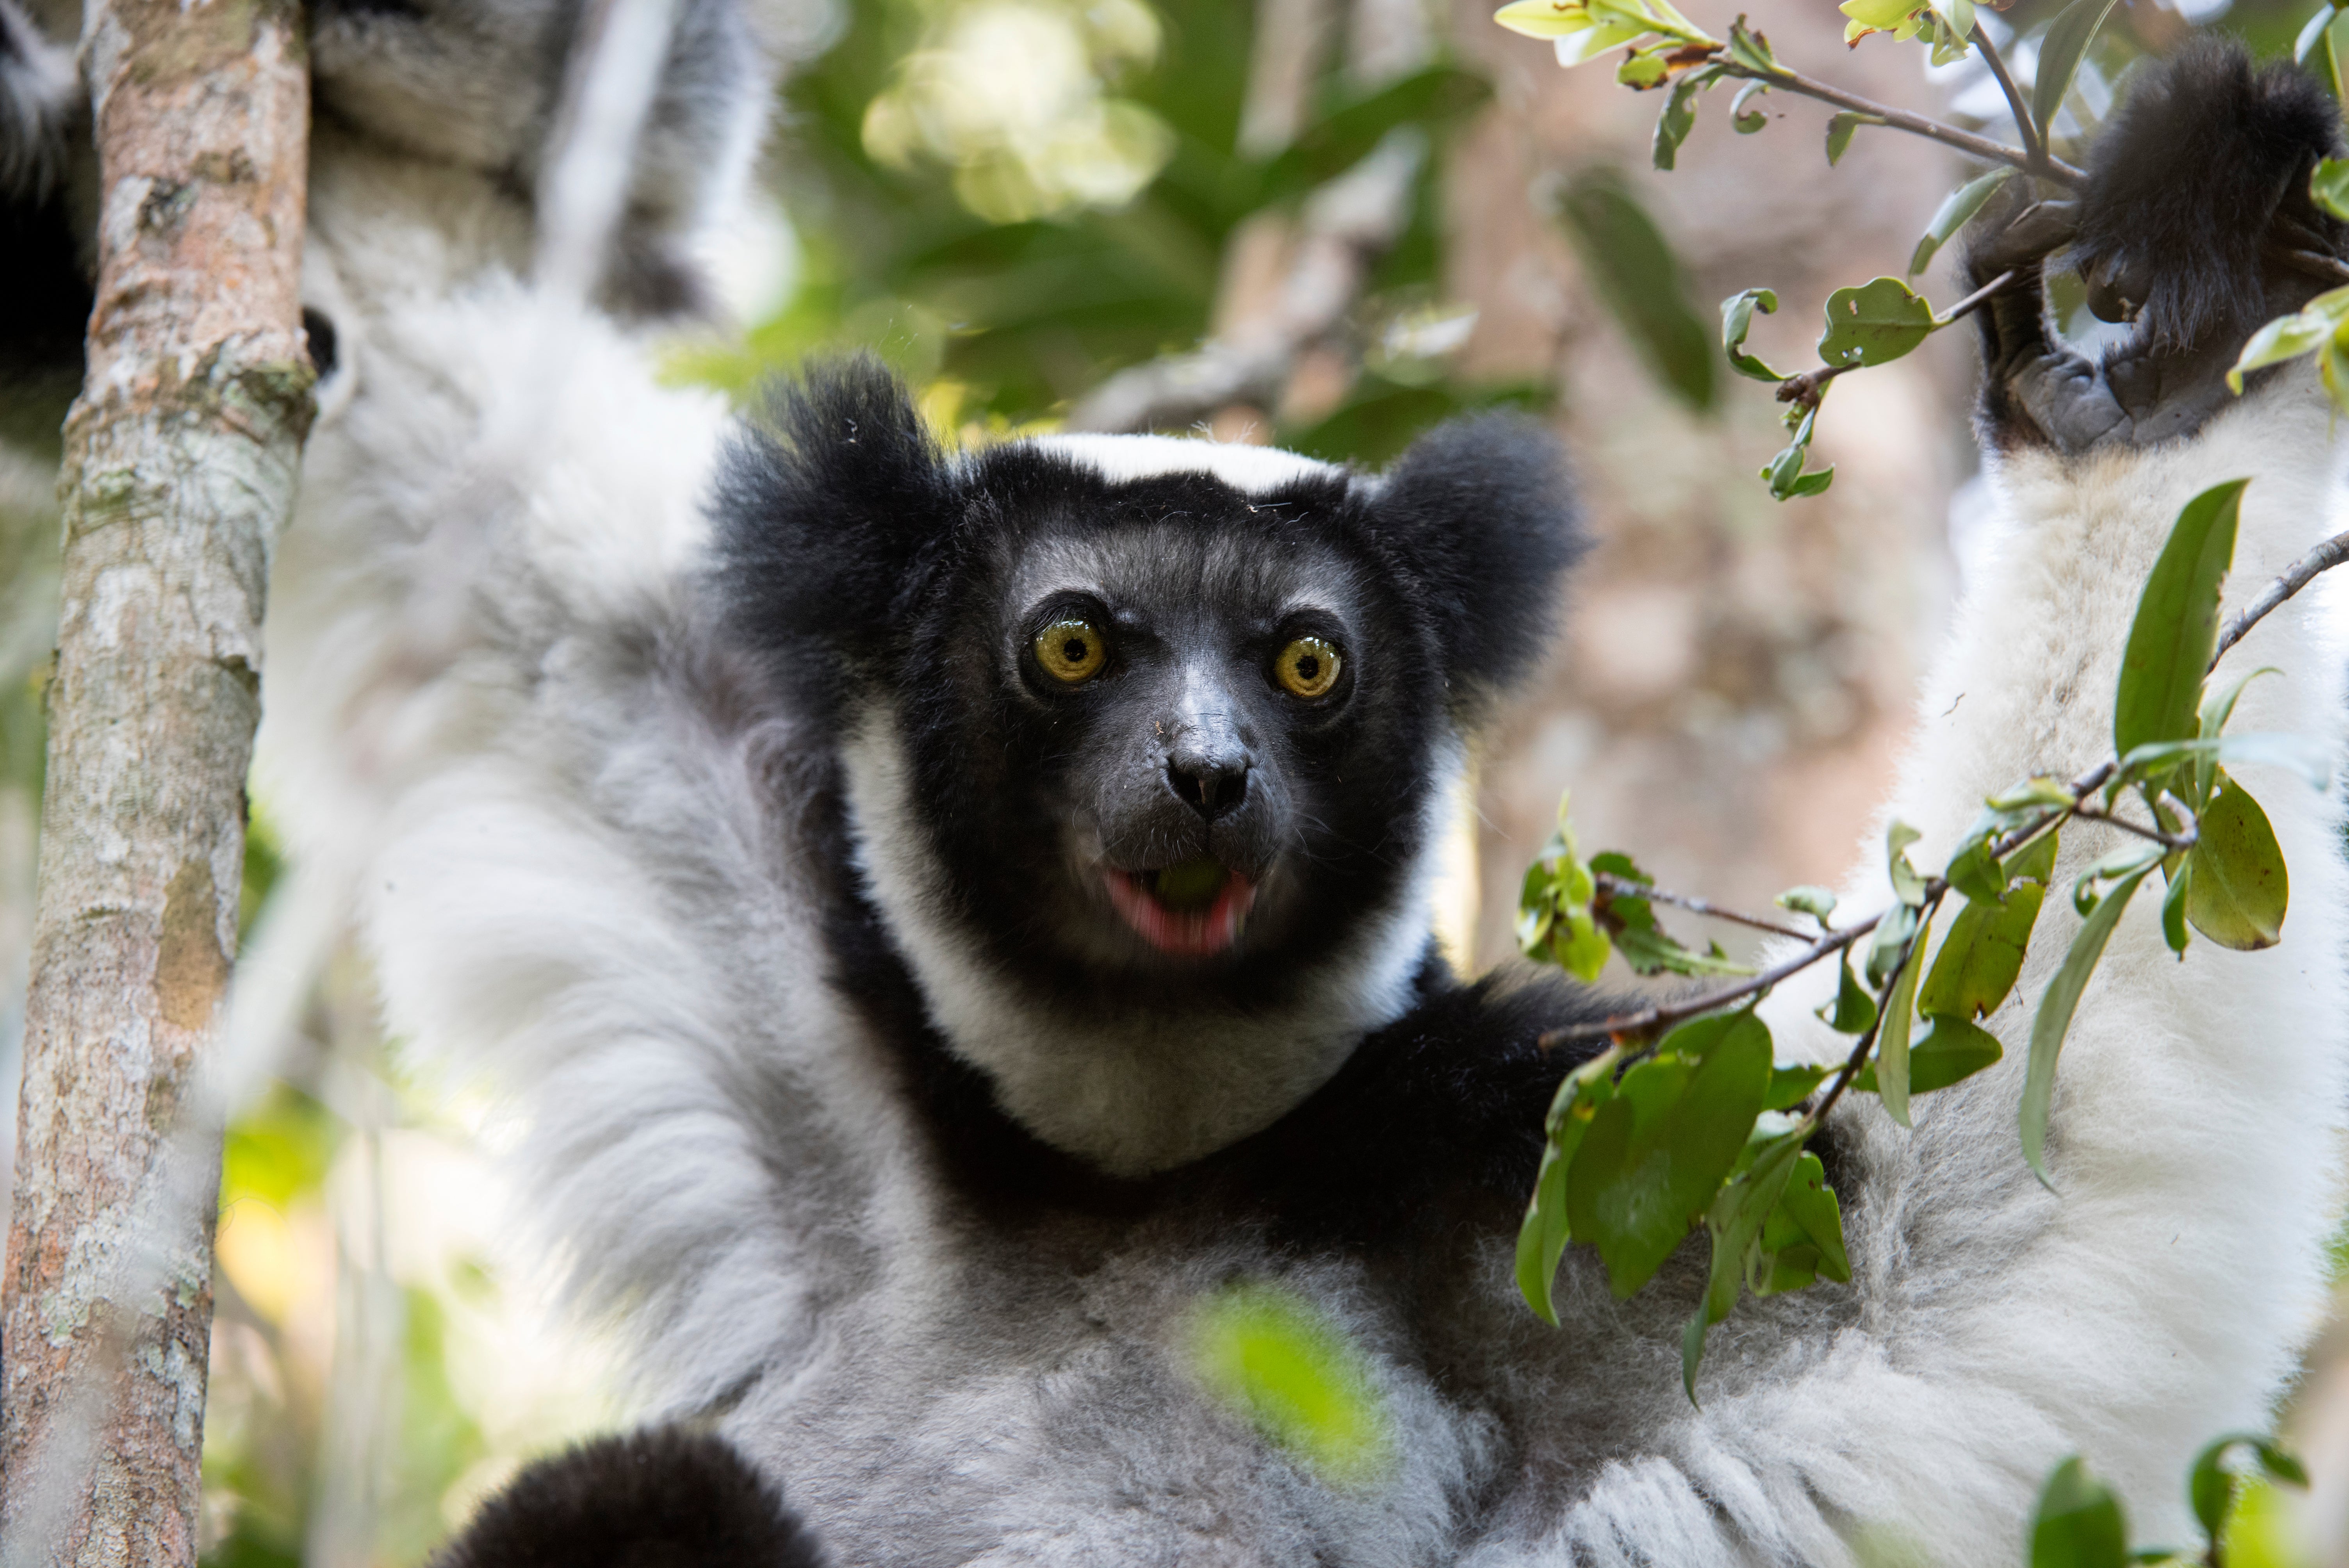 Black and white-coated Indri indri, also called the babakoto, are one of the largest living lemurs